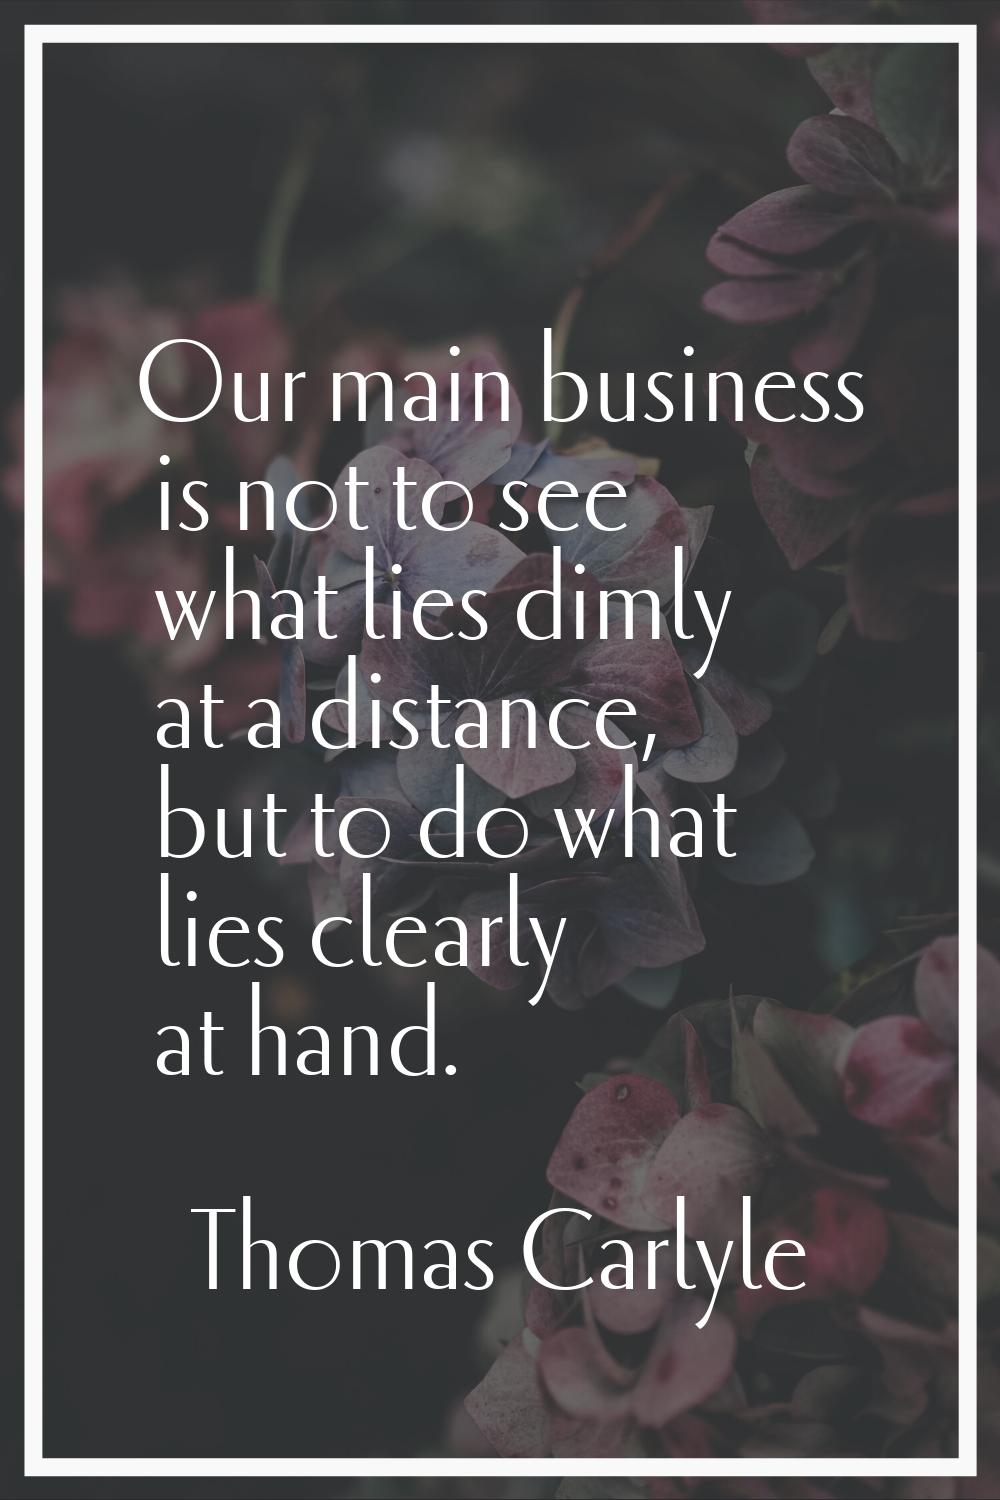 Our main business is not to see what lies dimly at a distance, but to do what lies clearly at hand.